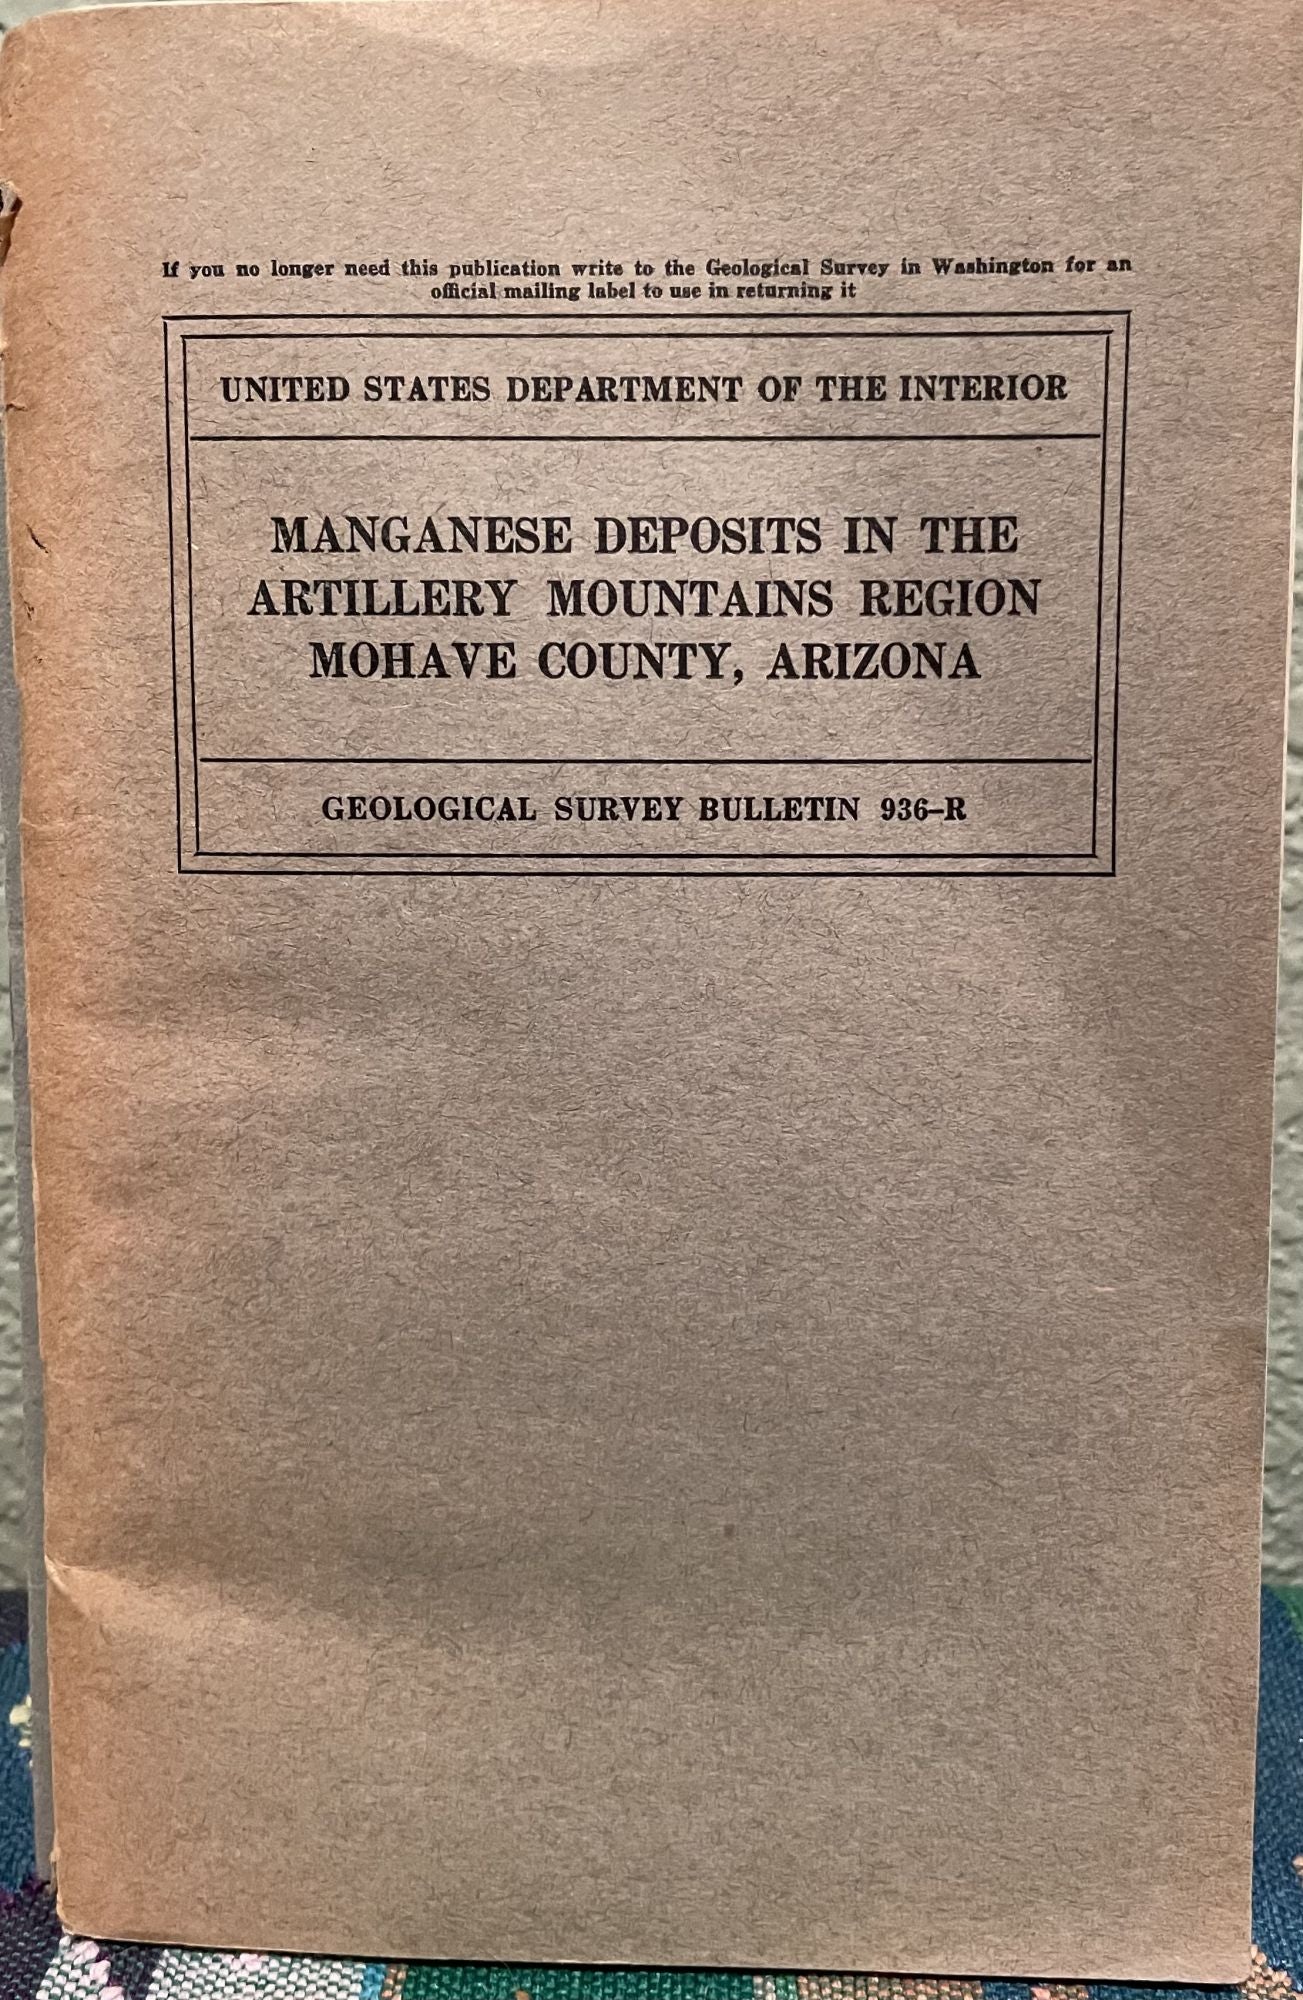 Manganese Deposits of the Artillery Mountains Region Mohave County Arizona. S. G. Lasky, B. N. Weber.